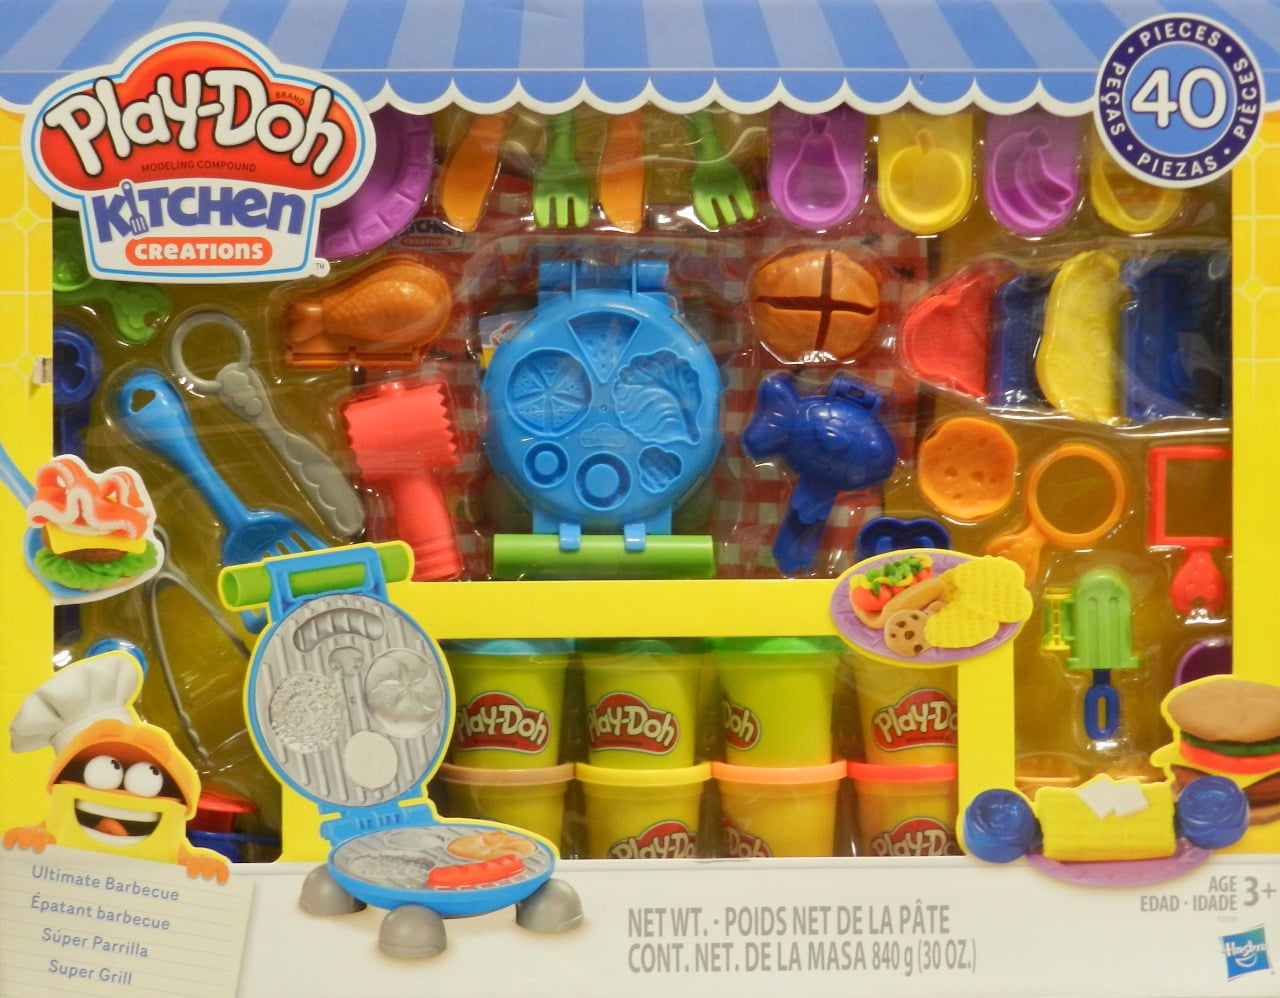 Play-Doh Kitchen Creations Sweets N Treats Kids Play Set 40-Pieces